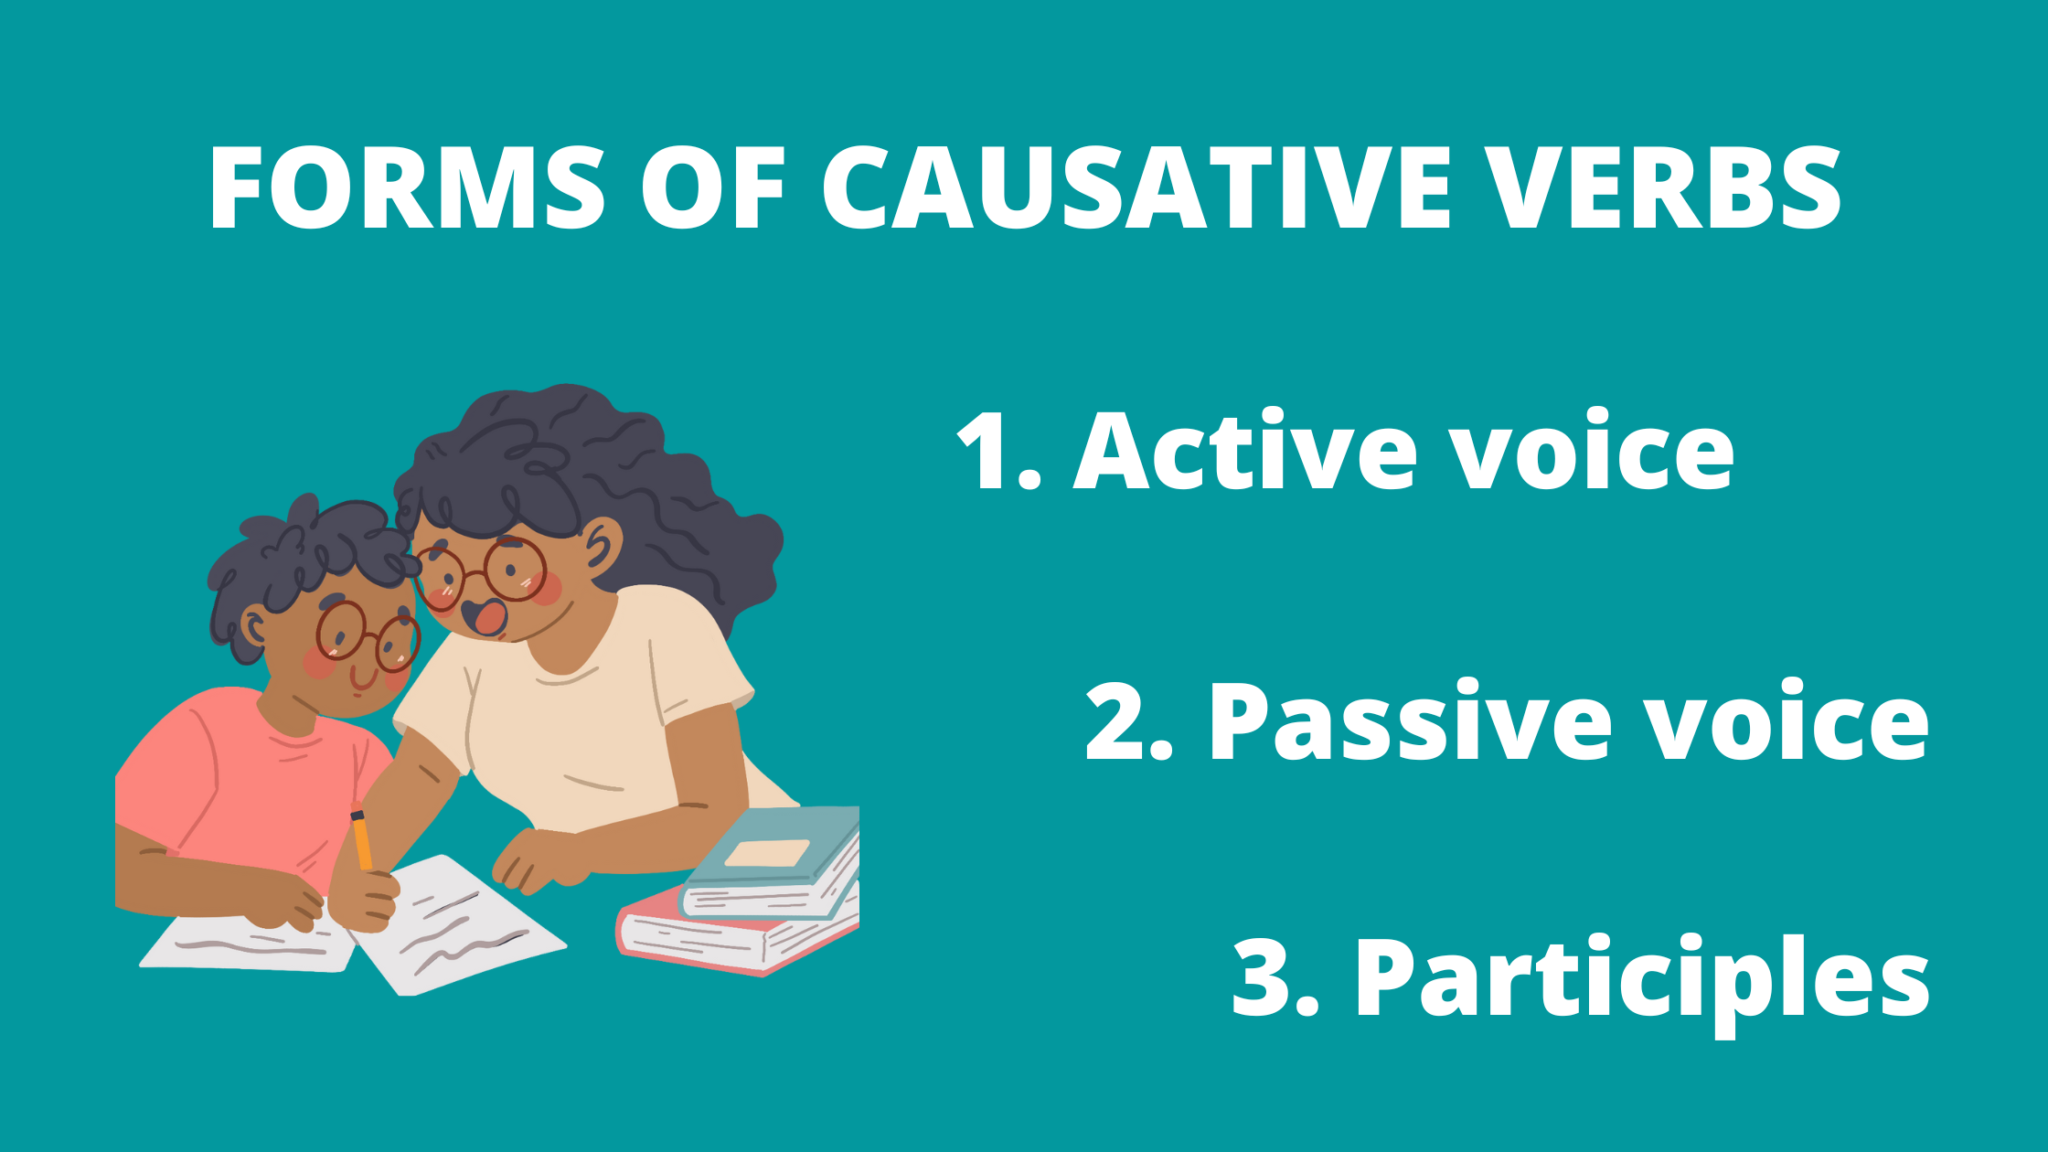 Is Help A Causative Verb